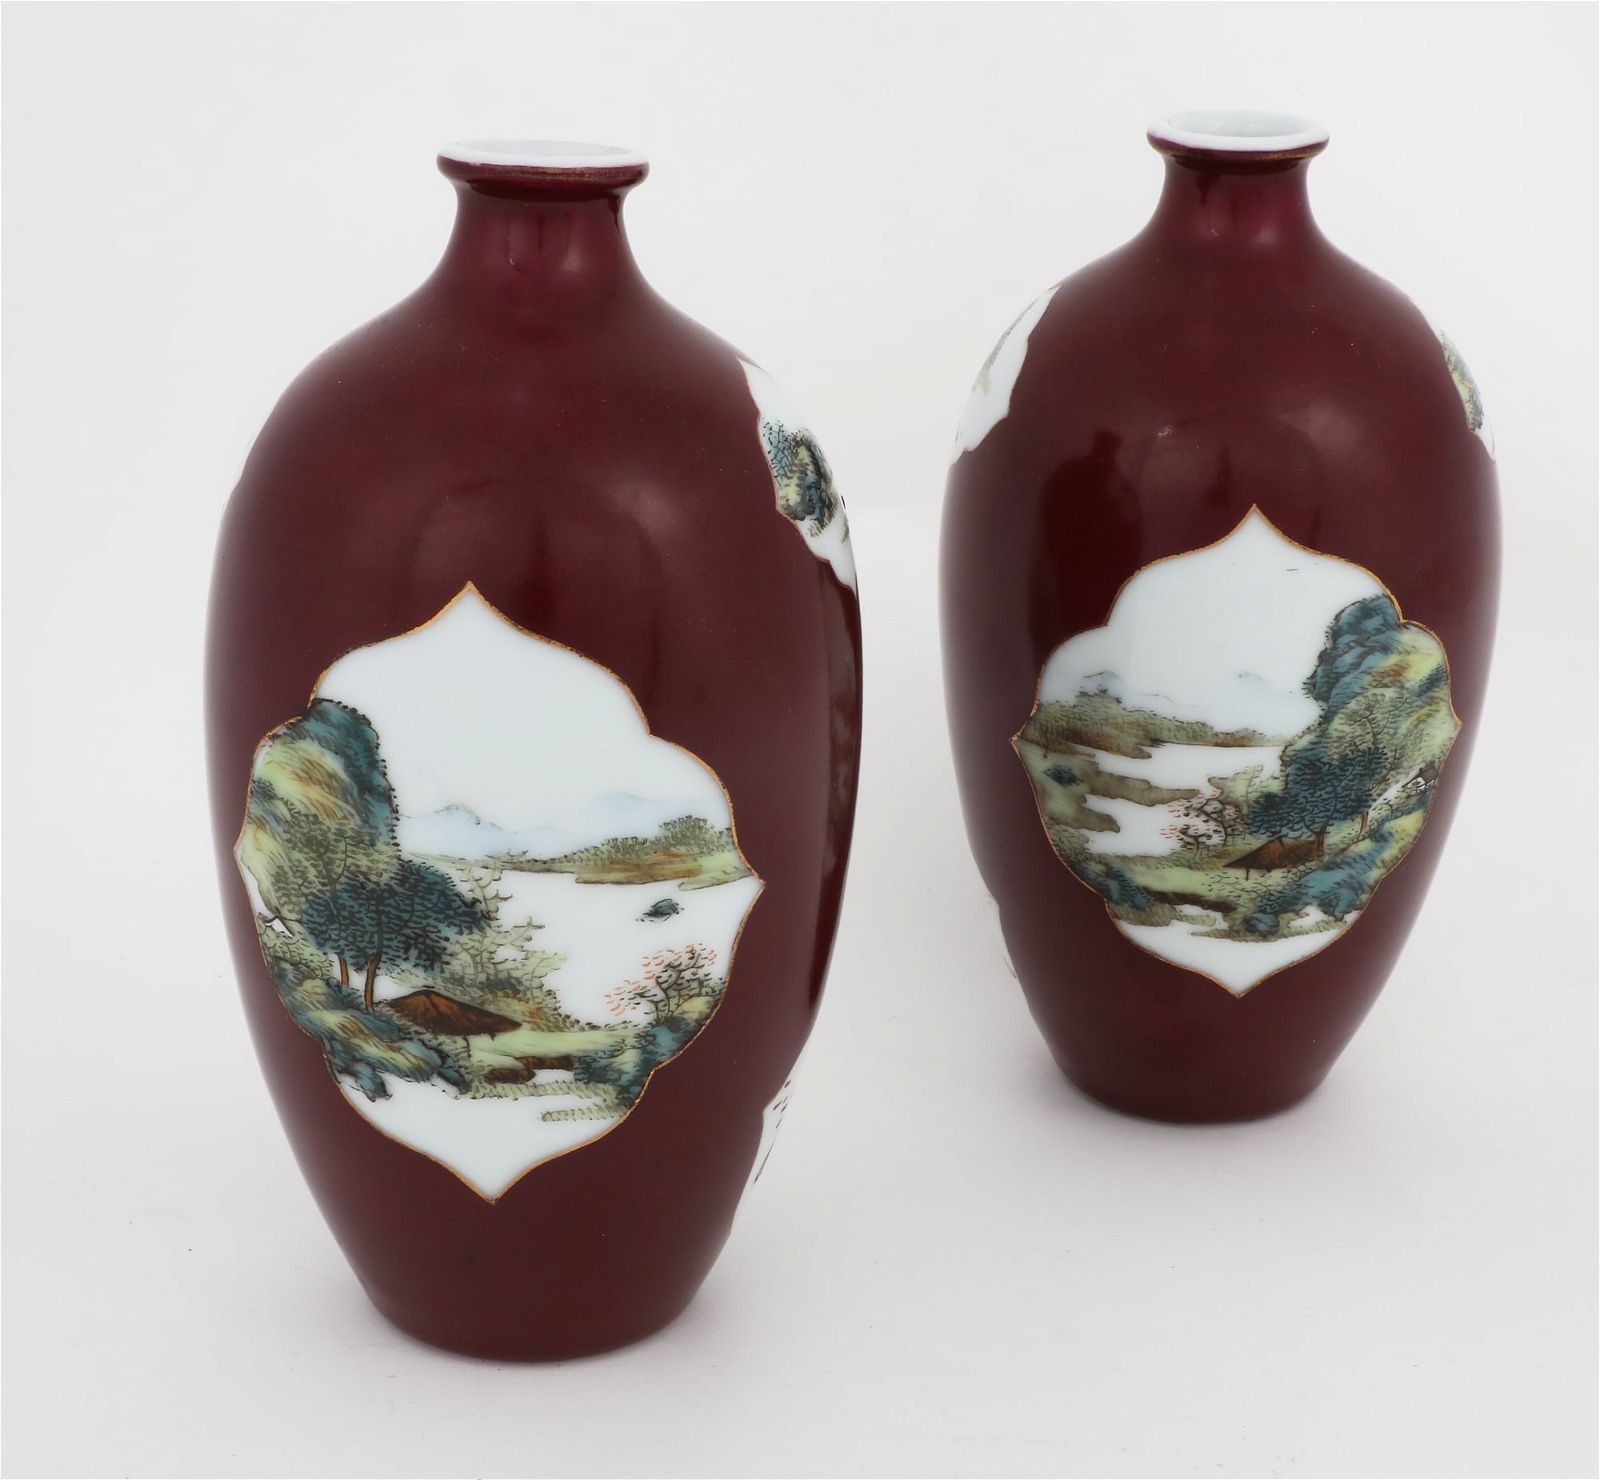 TWO CHINESE RED PORCELAIN VASESTwo 2fb422b